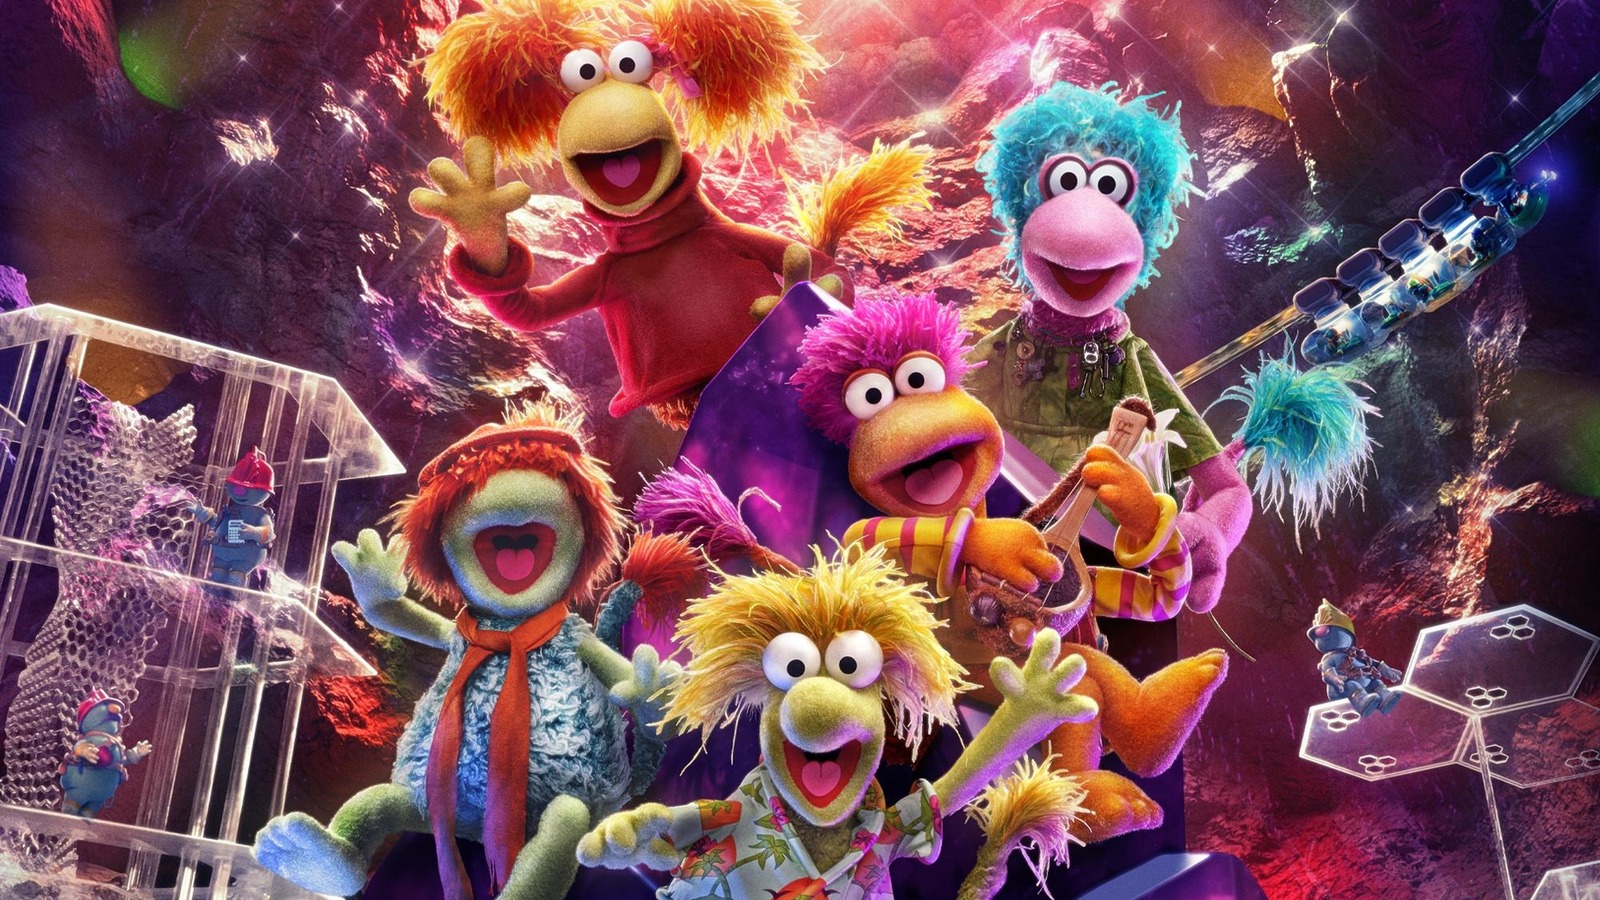 Fraggle Rock: Back To The Rock Trailer: Dance Your Cares Away With The  Beloved Muppets